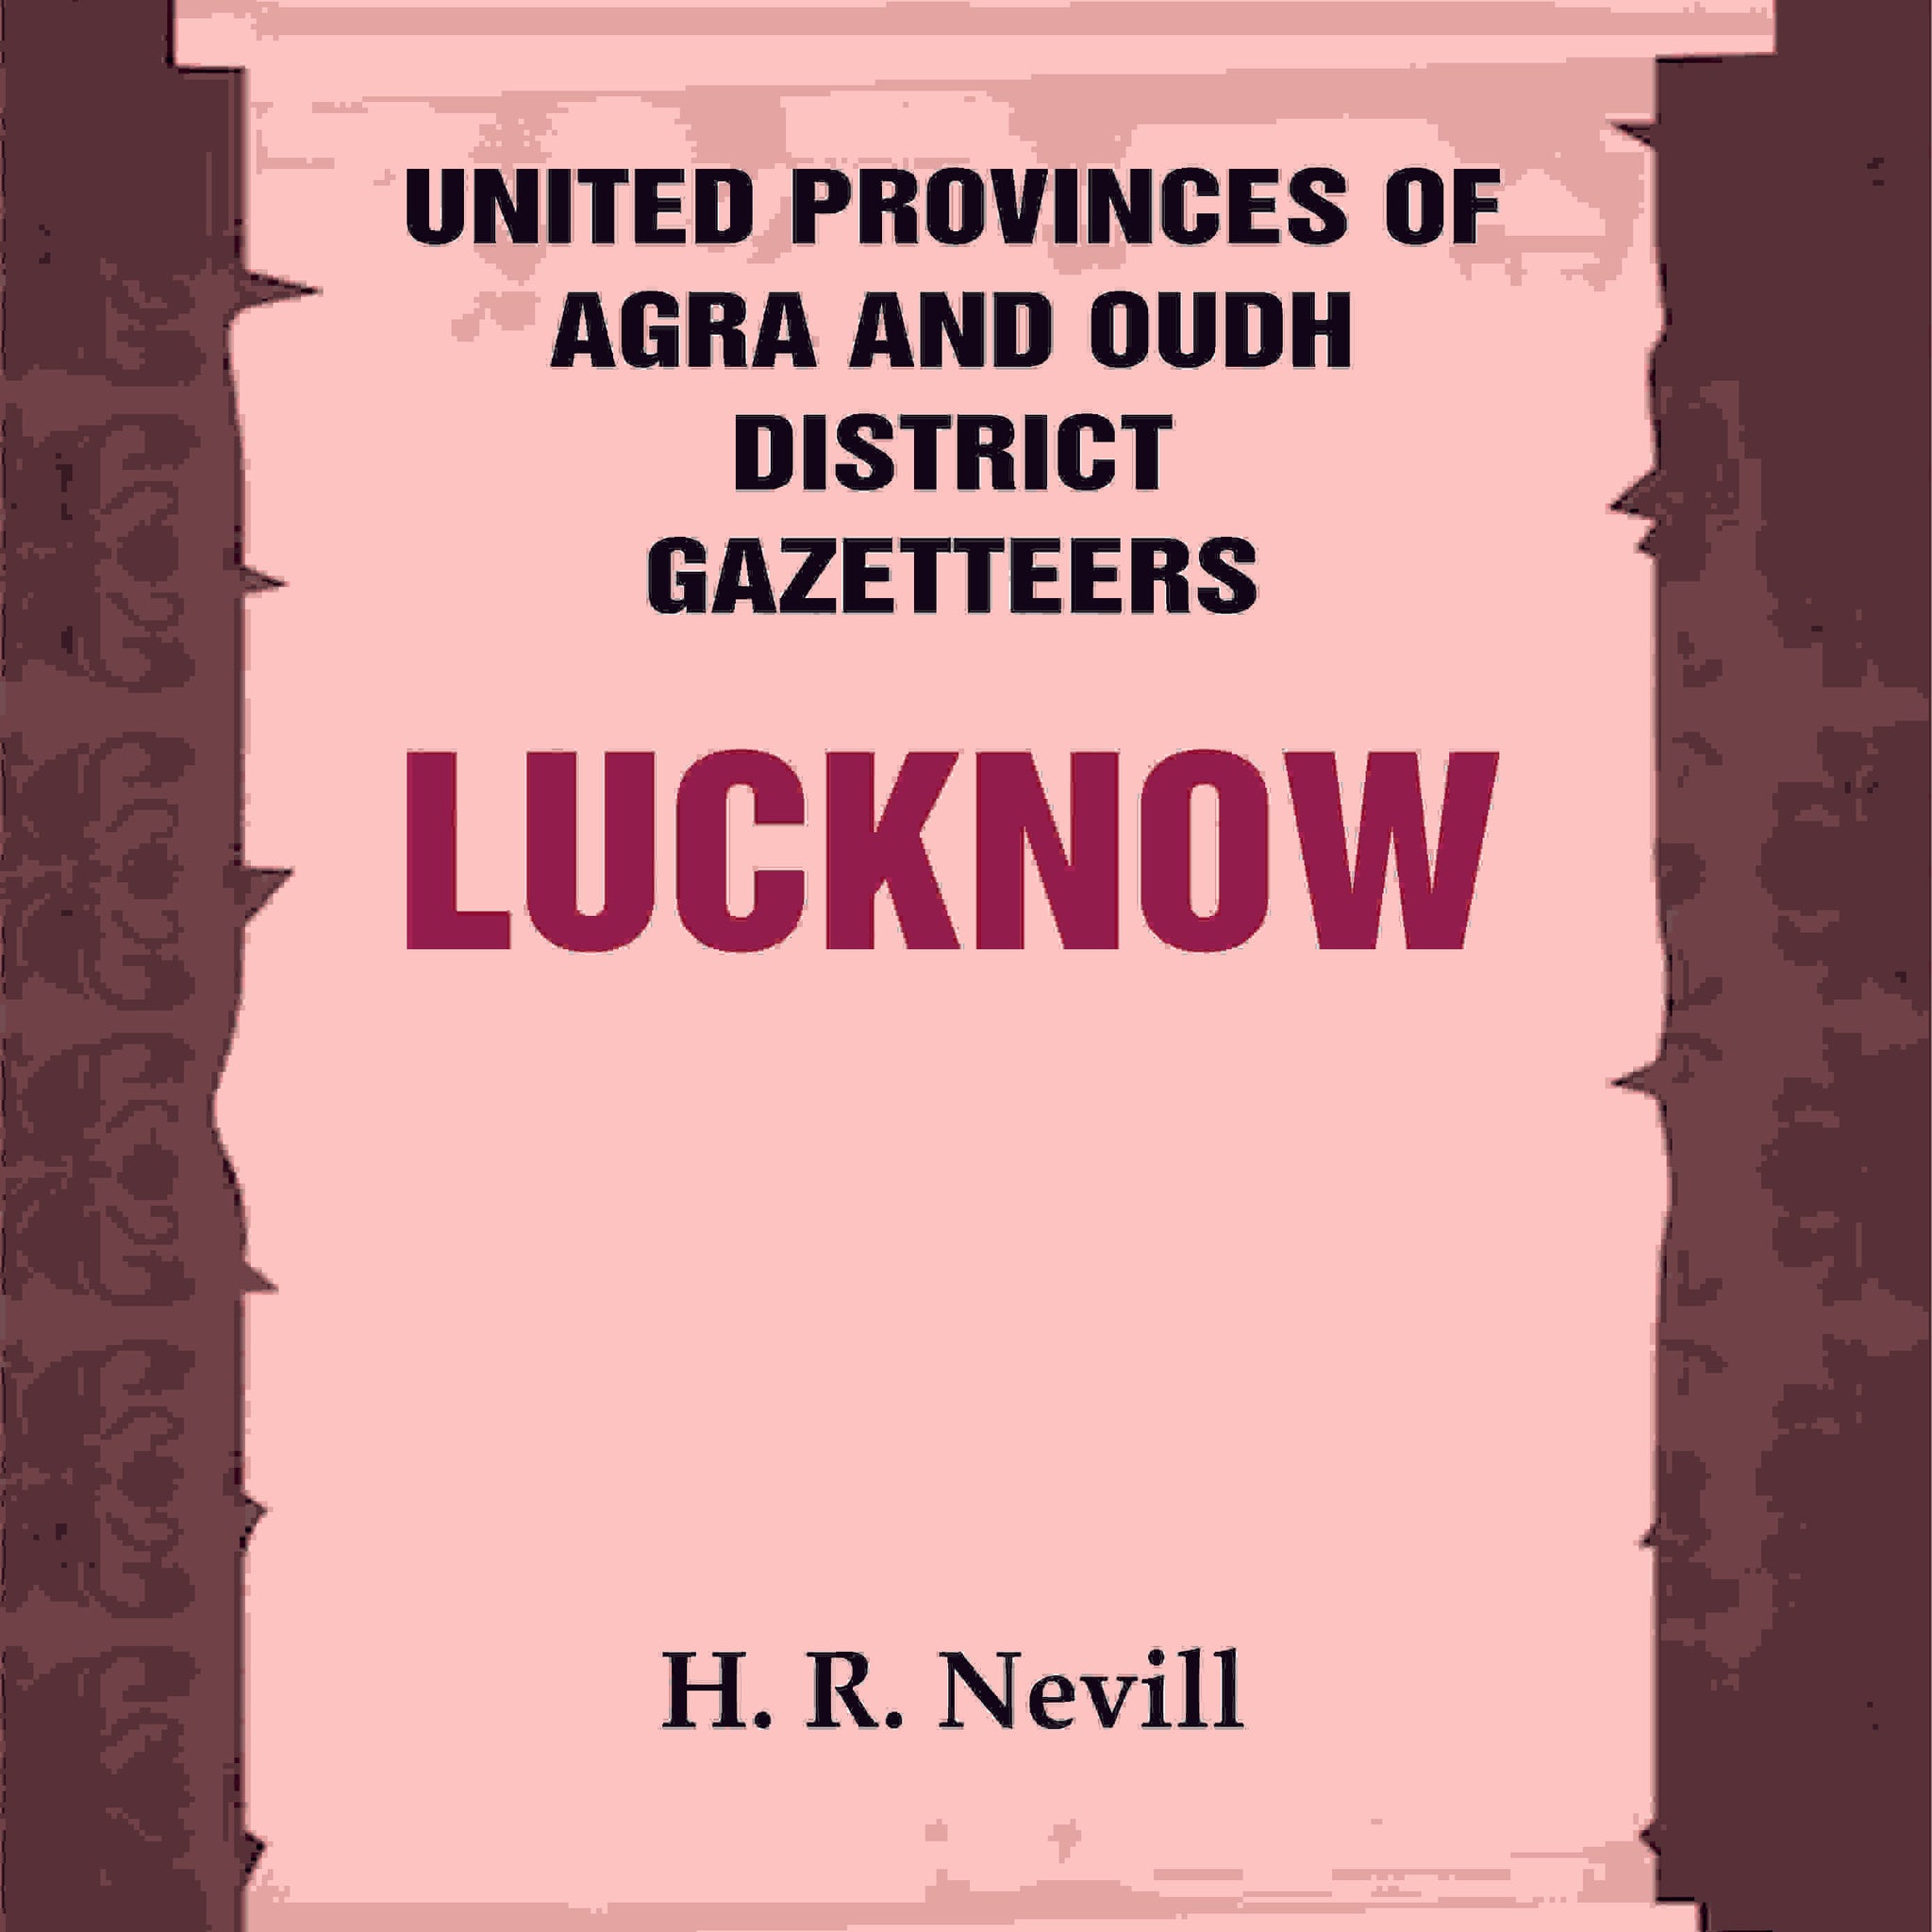 United Provinces of Agra and Oudh District Gazetteers: Lucknow